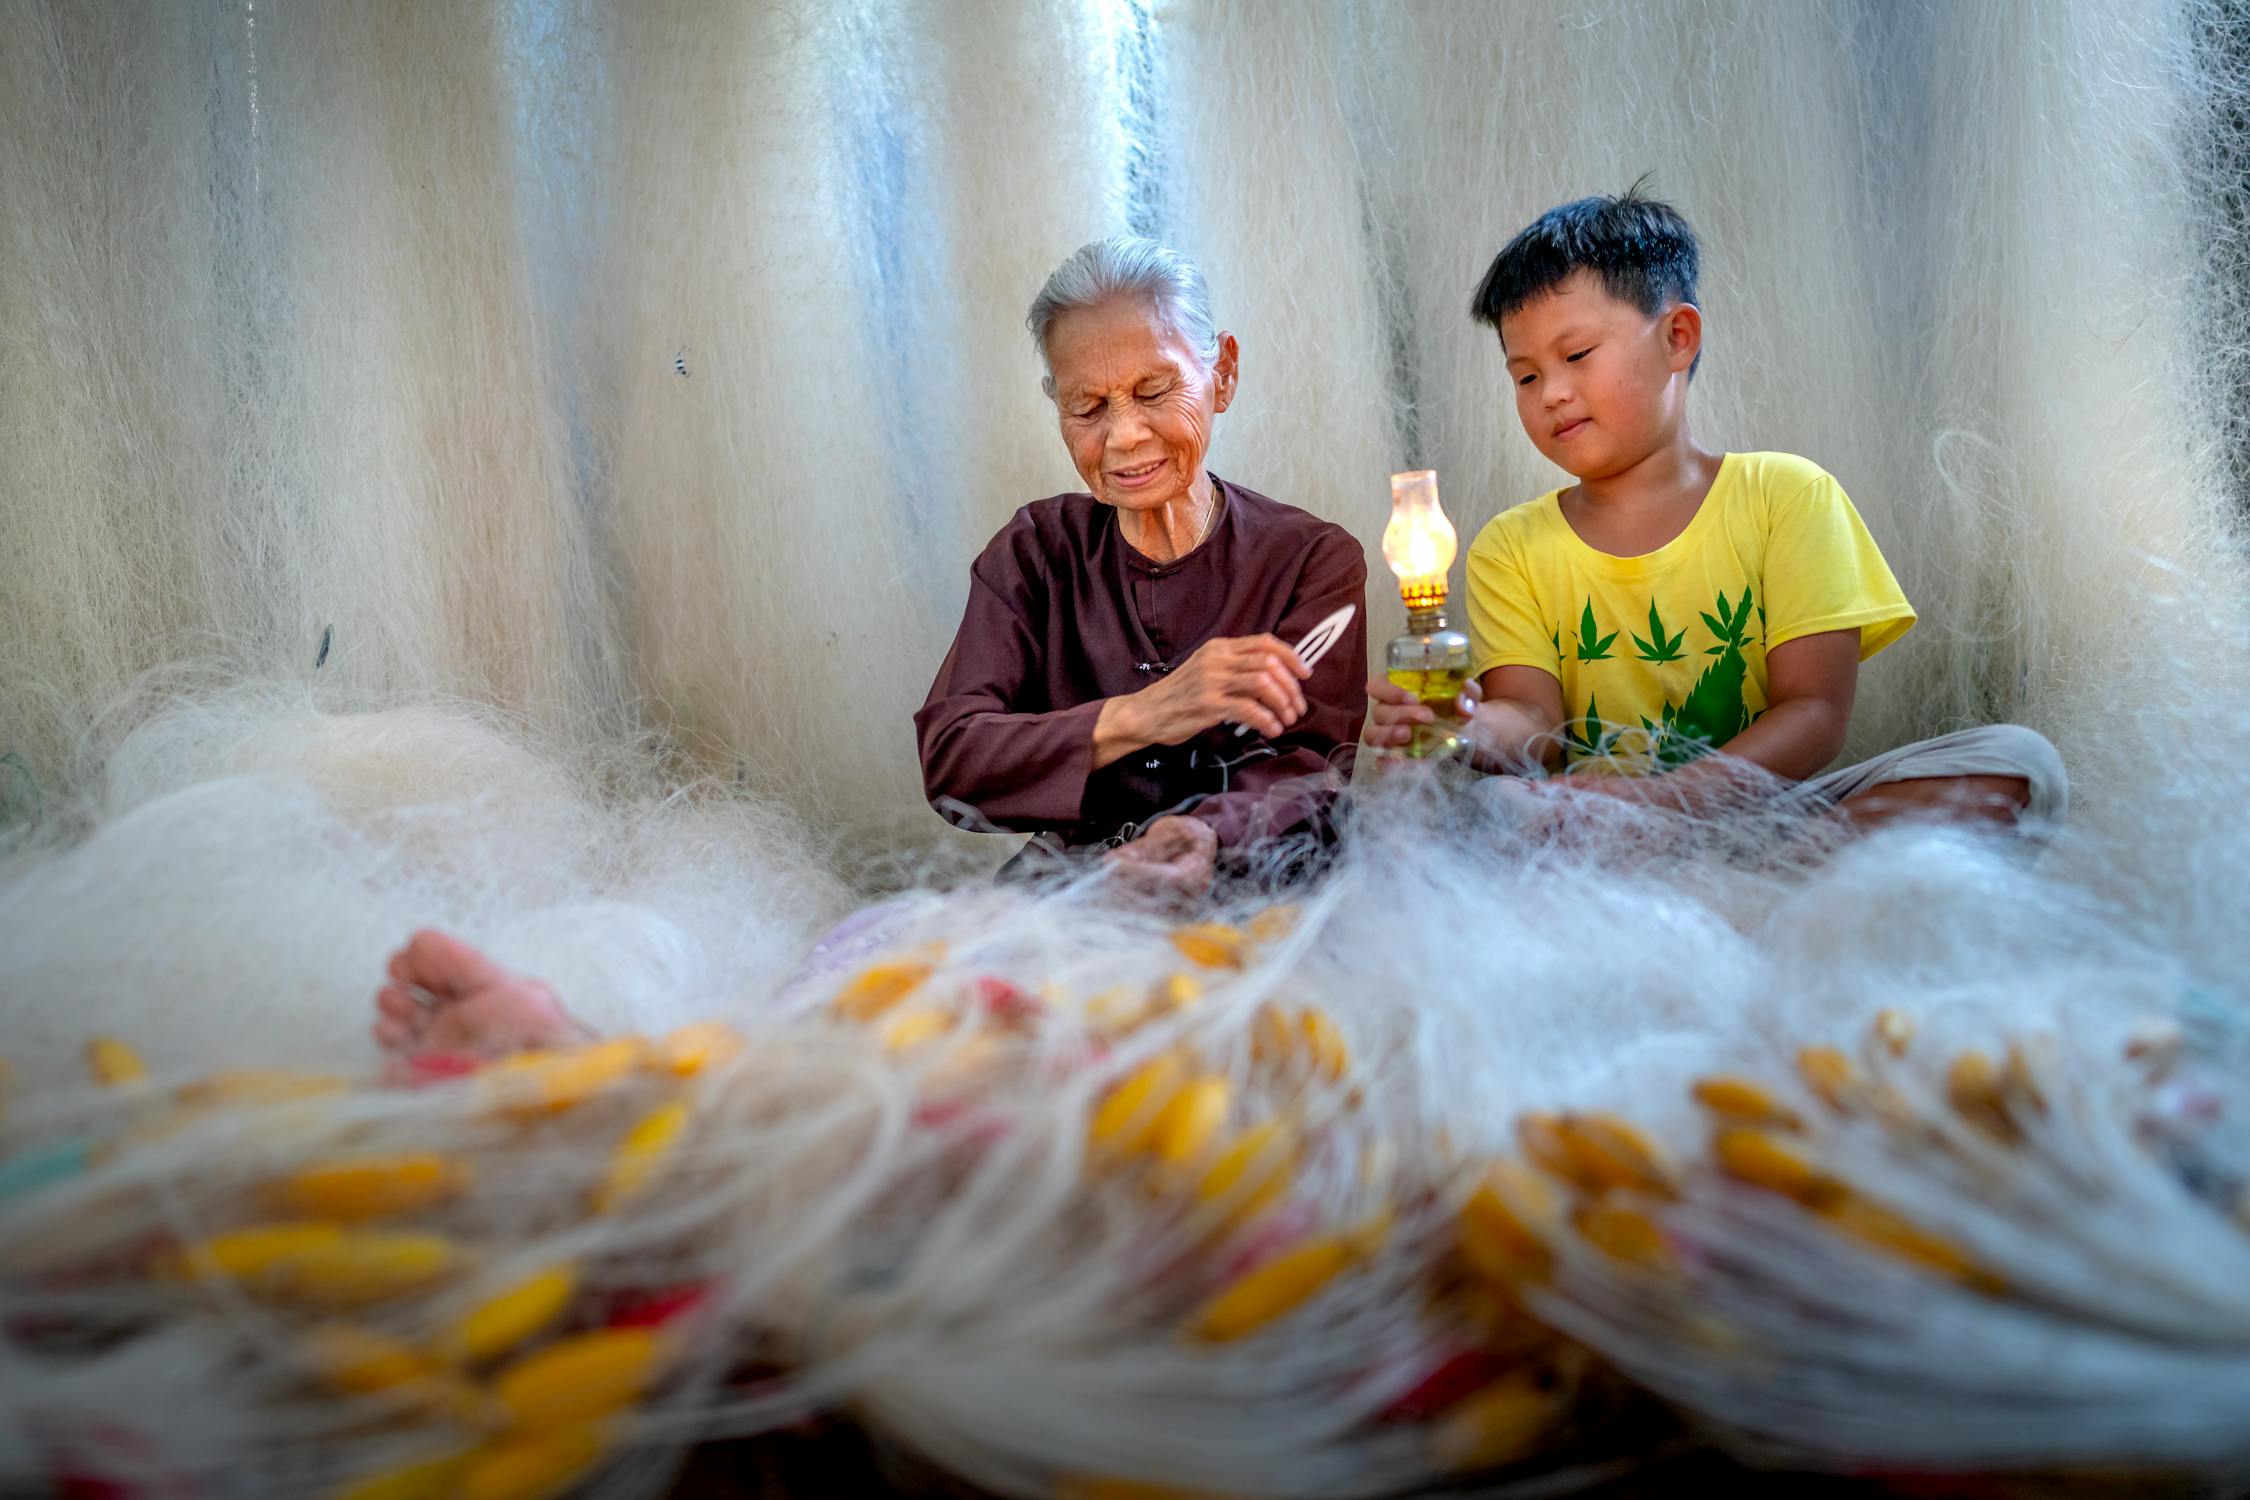 Child Labor Photo by Quang Nguyen Vinh from Pexels: https://www.pexels.com/photo/attentive-asian-grandmother-repairing-fishing-net-against-grandson-6710956/